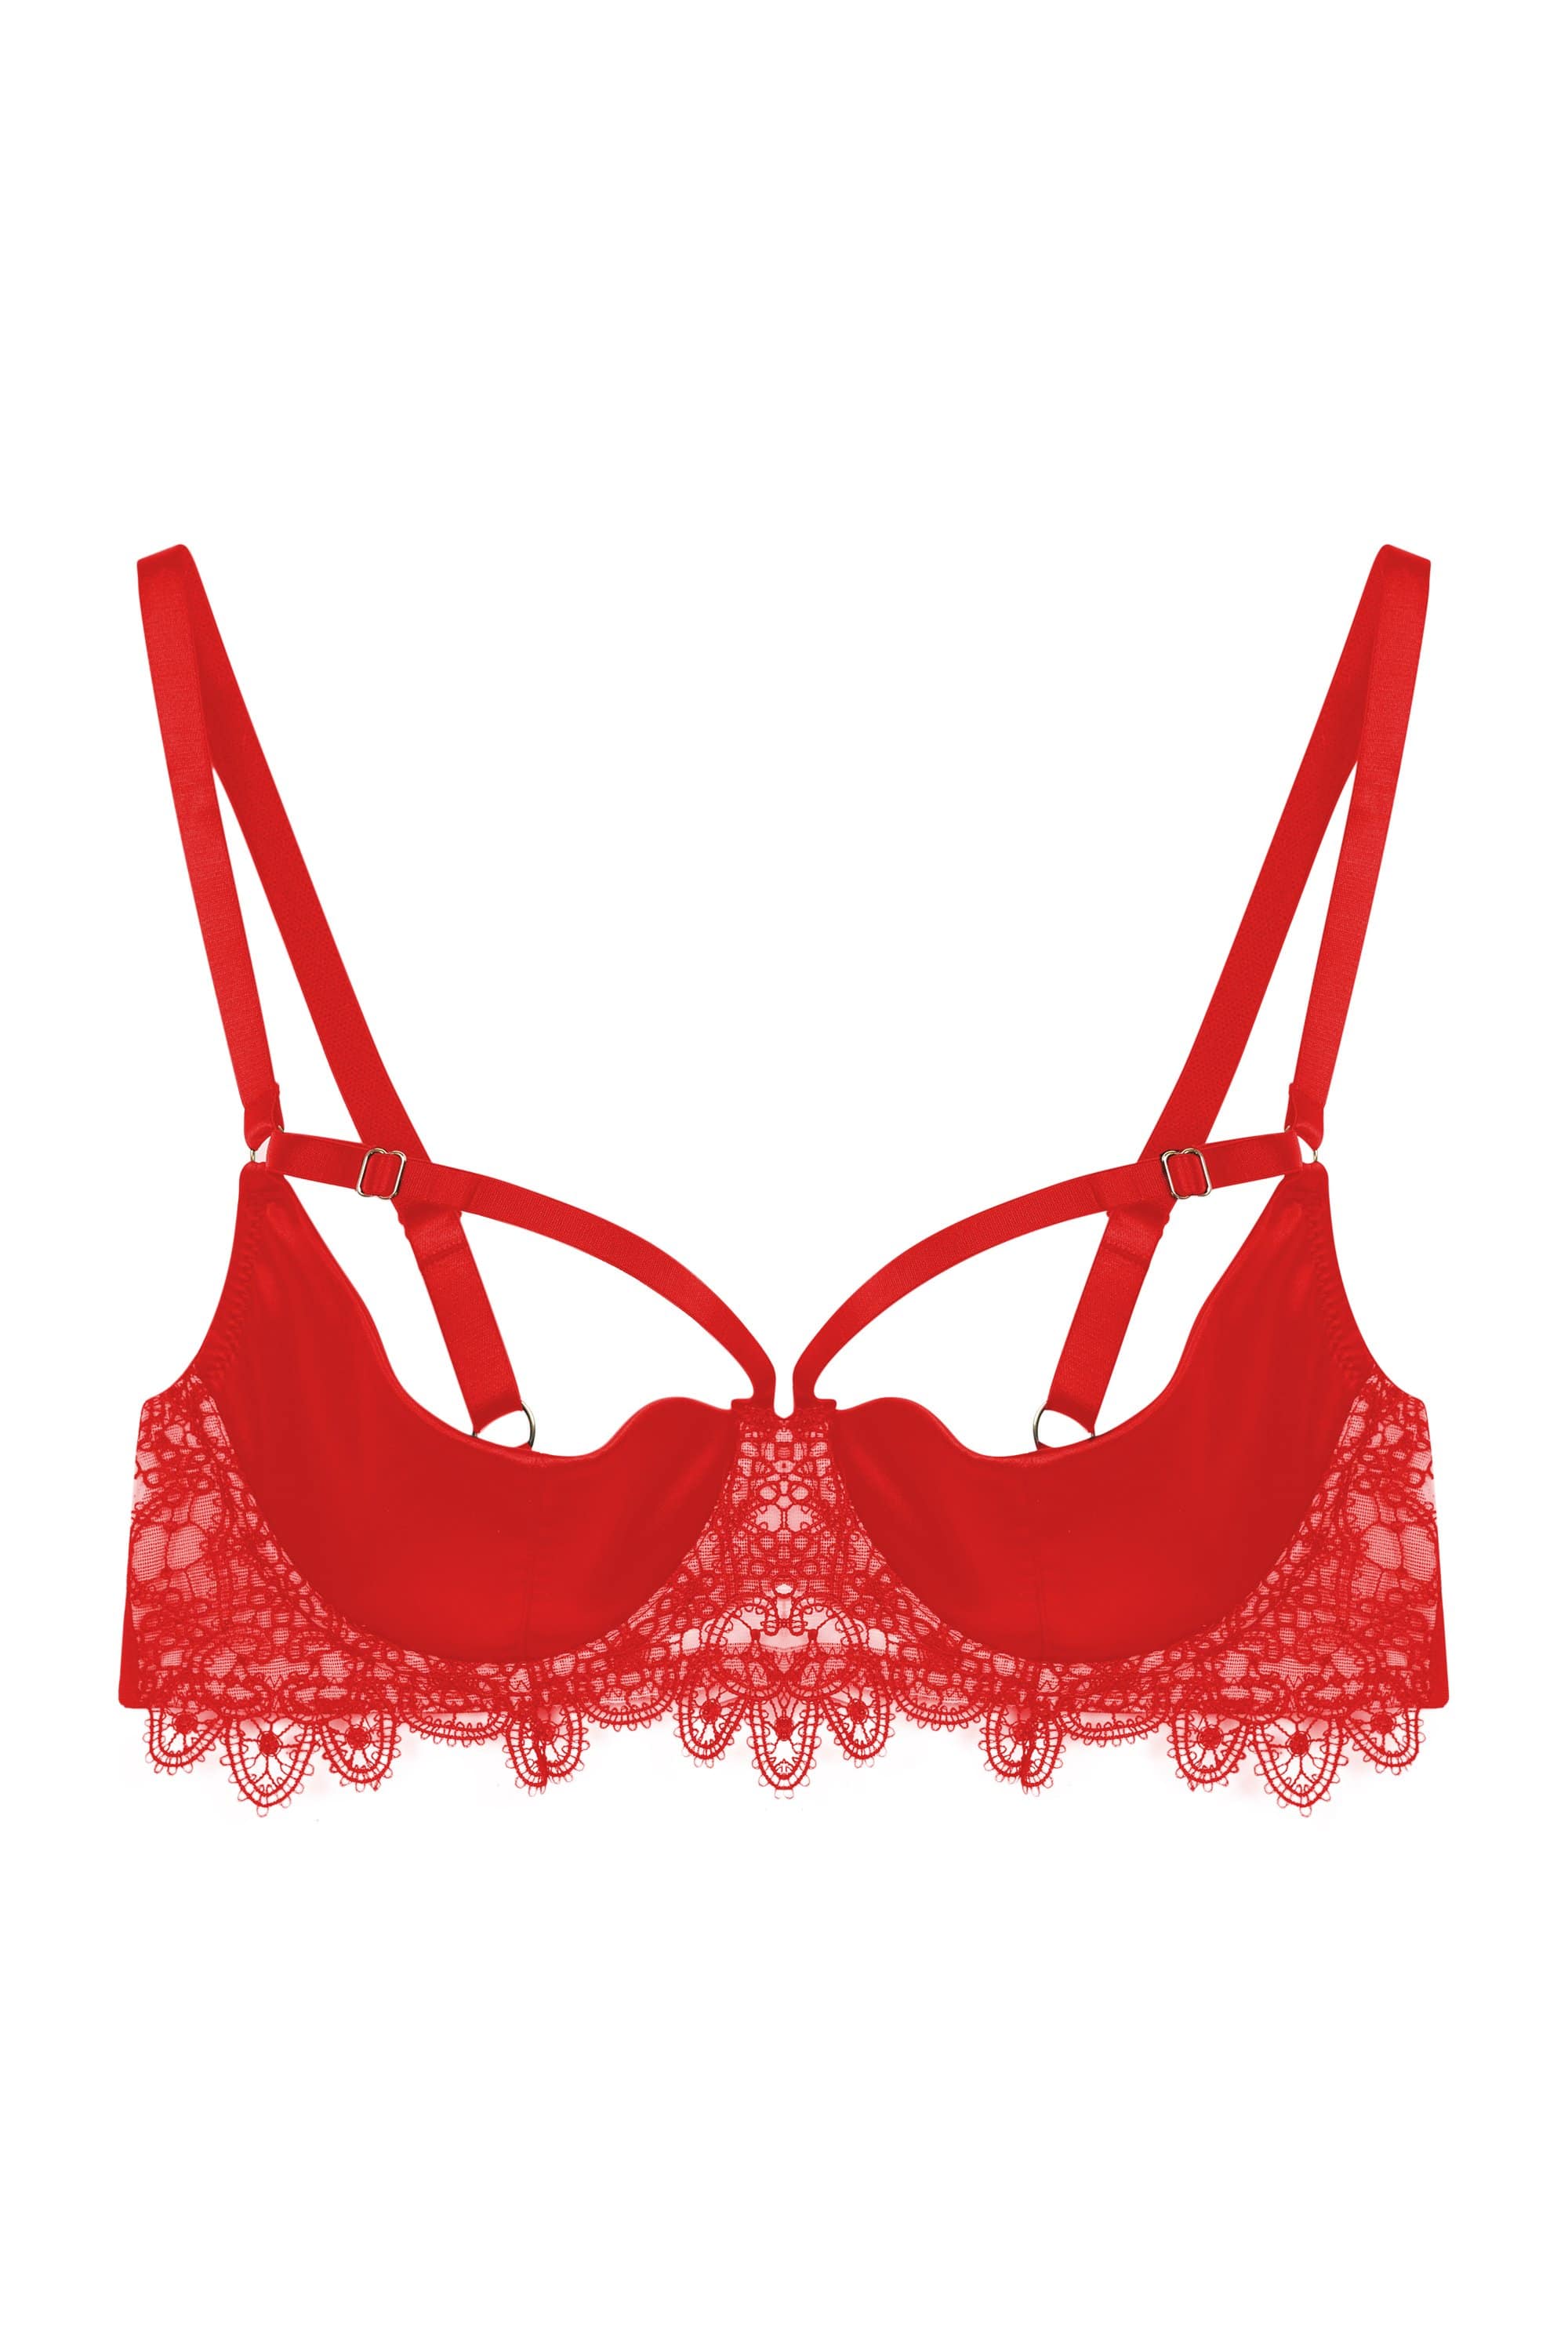 Buy Mati Red Overlap Bralette and Shorts (Set of 2) online